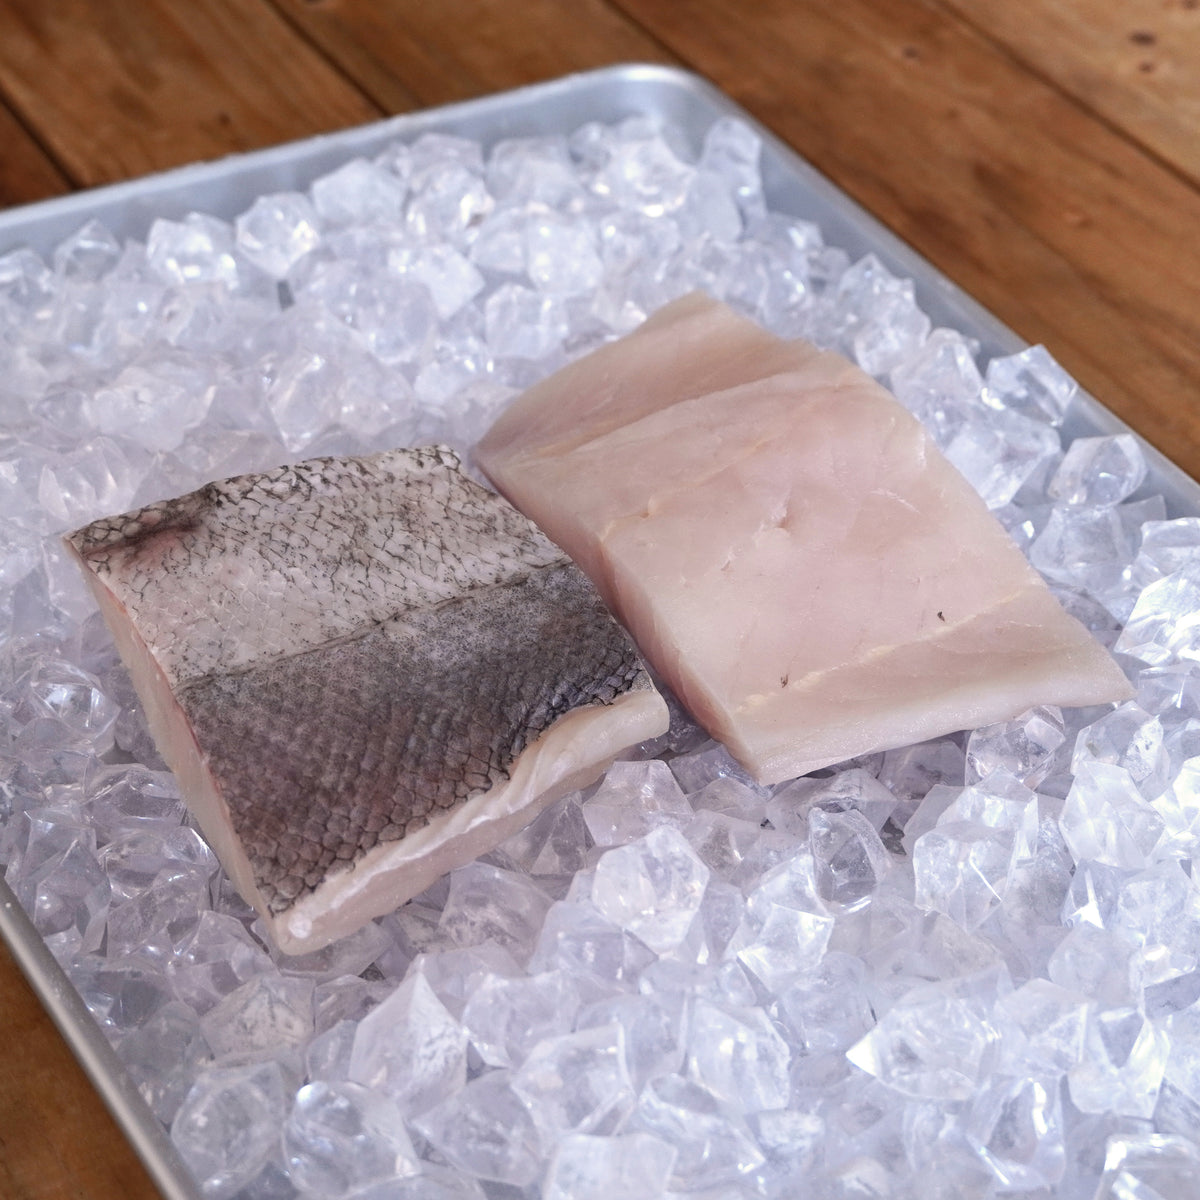 Wild-Caught Hake Fish Fillets from New Zealand (450g) - Horizon Farms